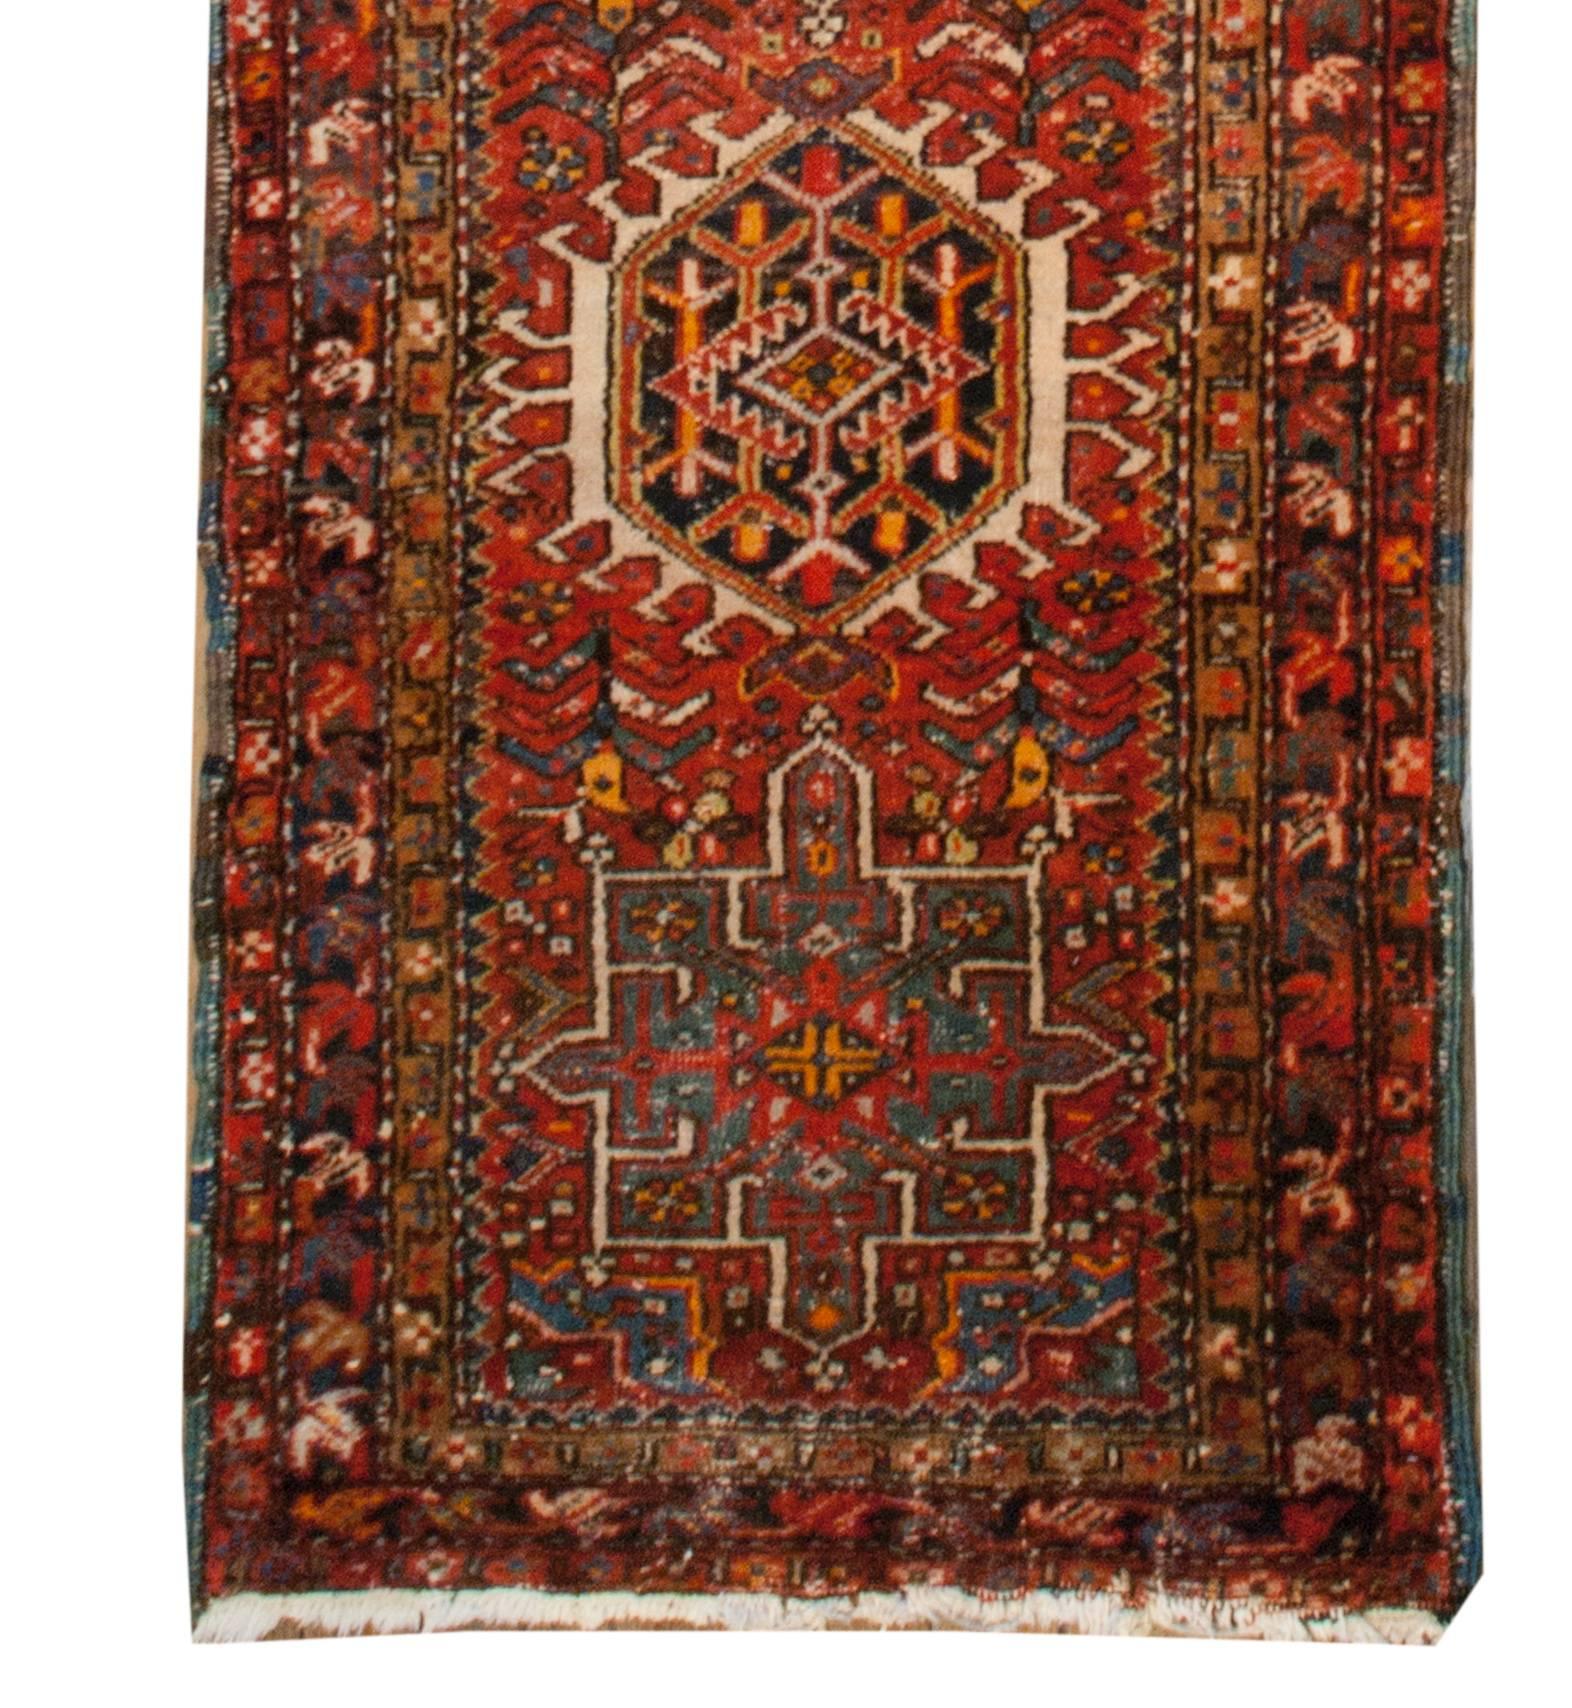 An early 20th century Persian Heriz runner with alternating geometric diamond and rectangular medallions, all with stylized decorative designs woven in brilliant crimson, indigo, gold, and white wool. The medallions are resting amidst a crimson